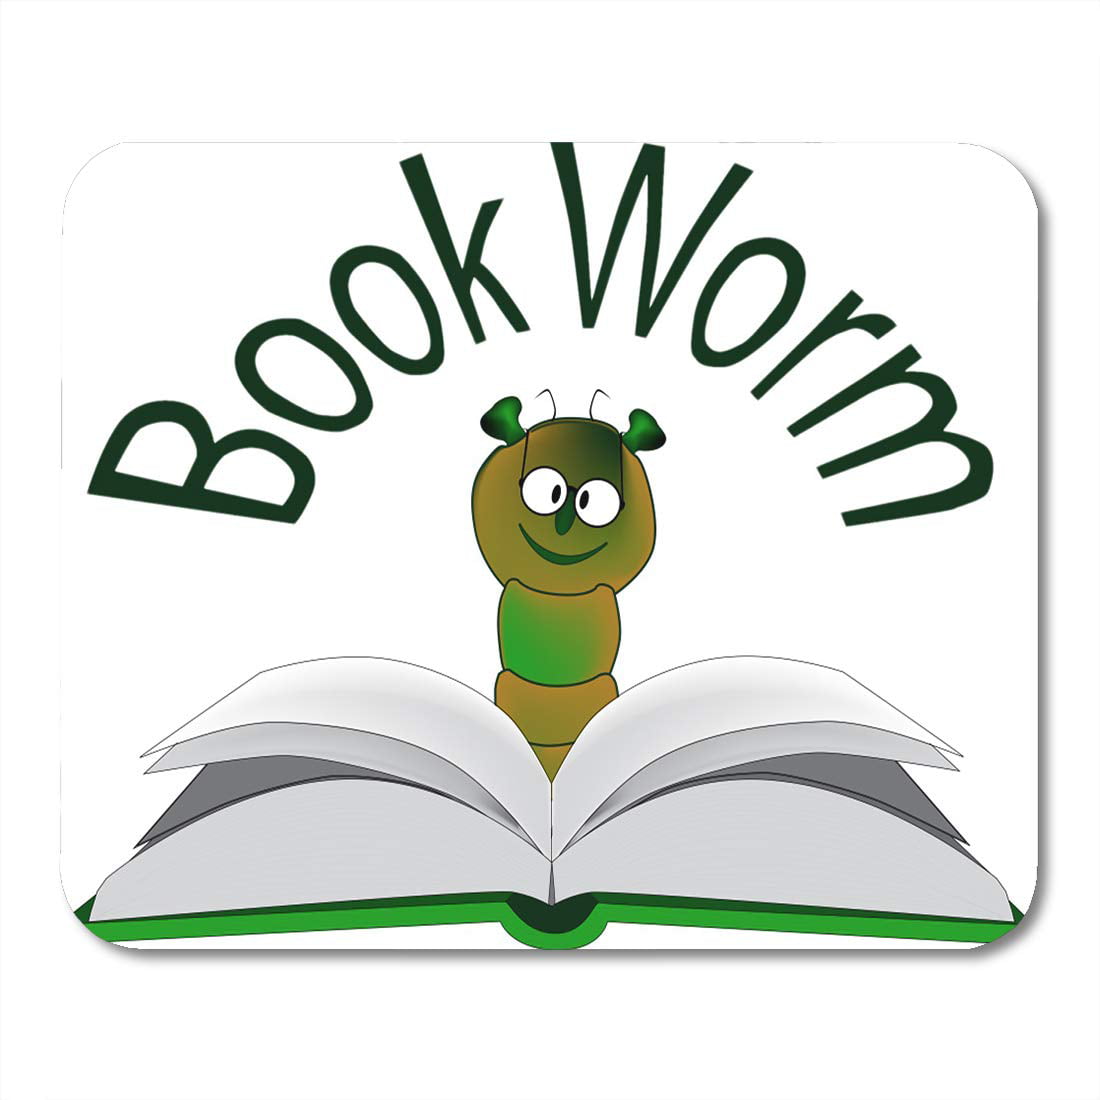 Green Absorbing Bookworm Cartoon The Book Worm is Eagerly Mousepad Mouse  Pad Mouse Mat 9x10 inch 